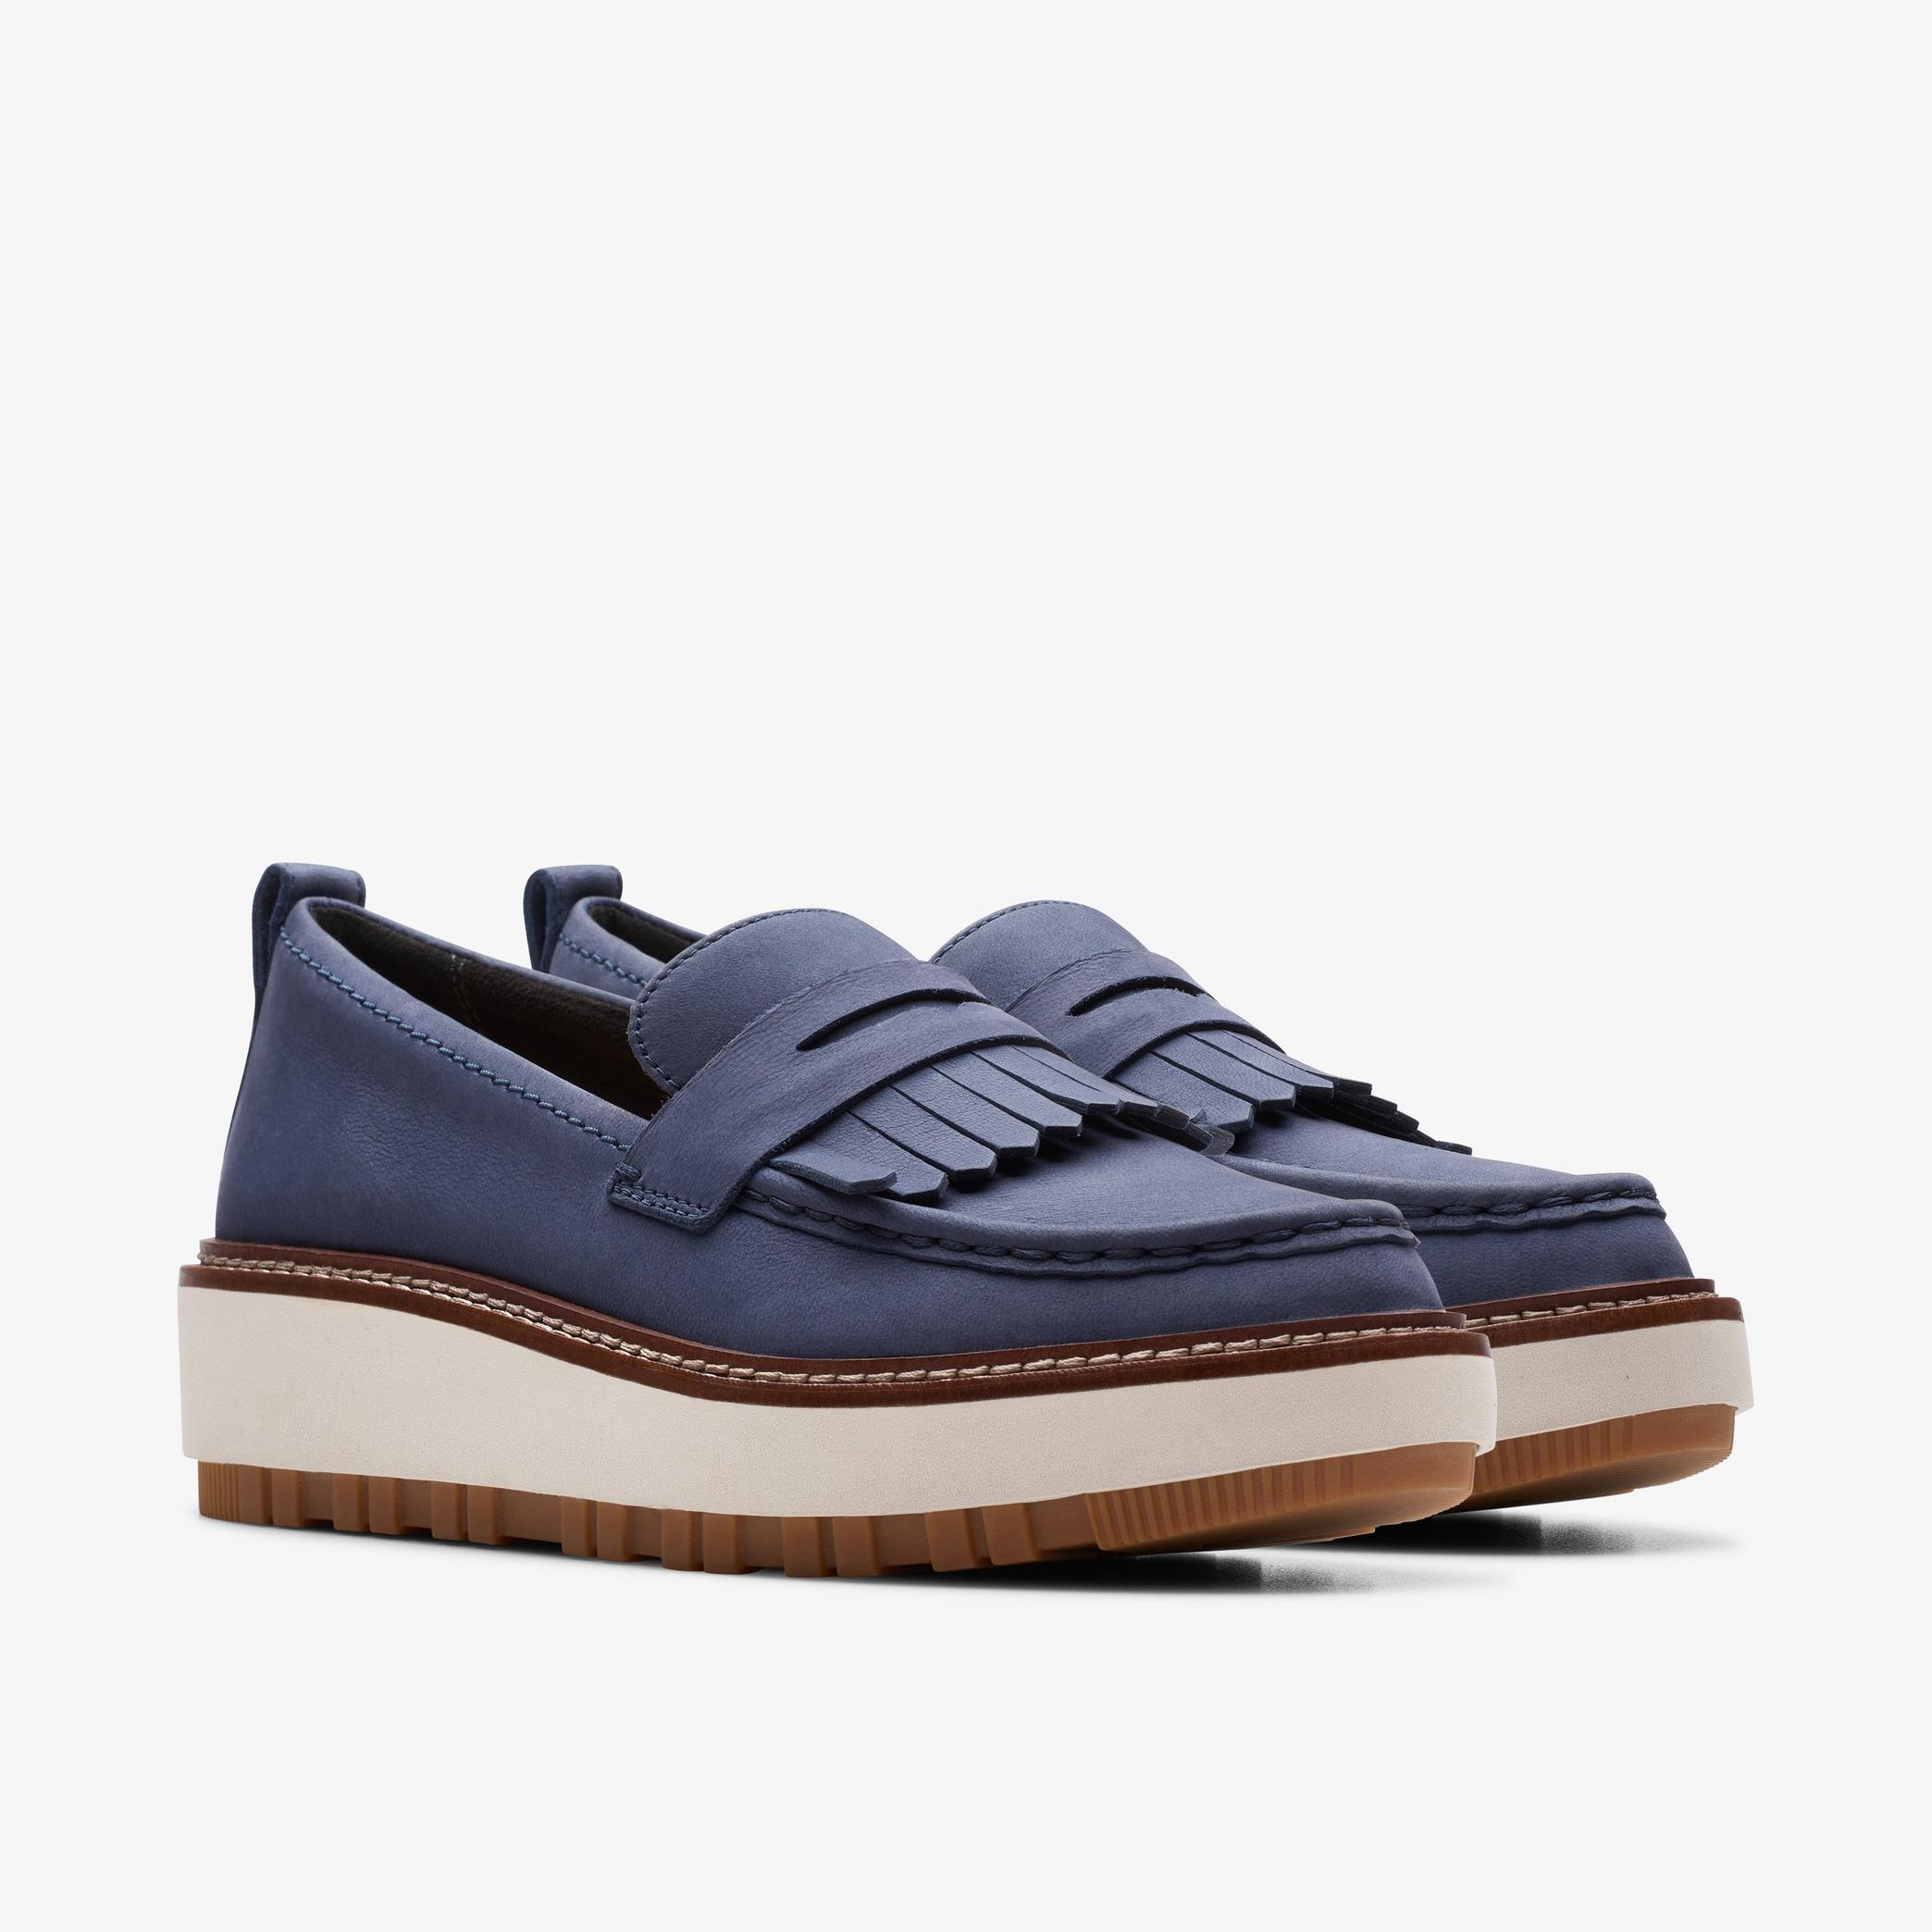 Orianna Loafer Navy Nubuck Loafers, view 6 of 11